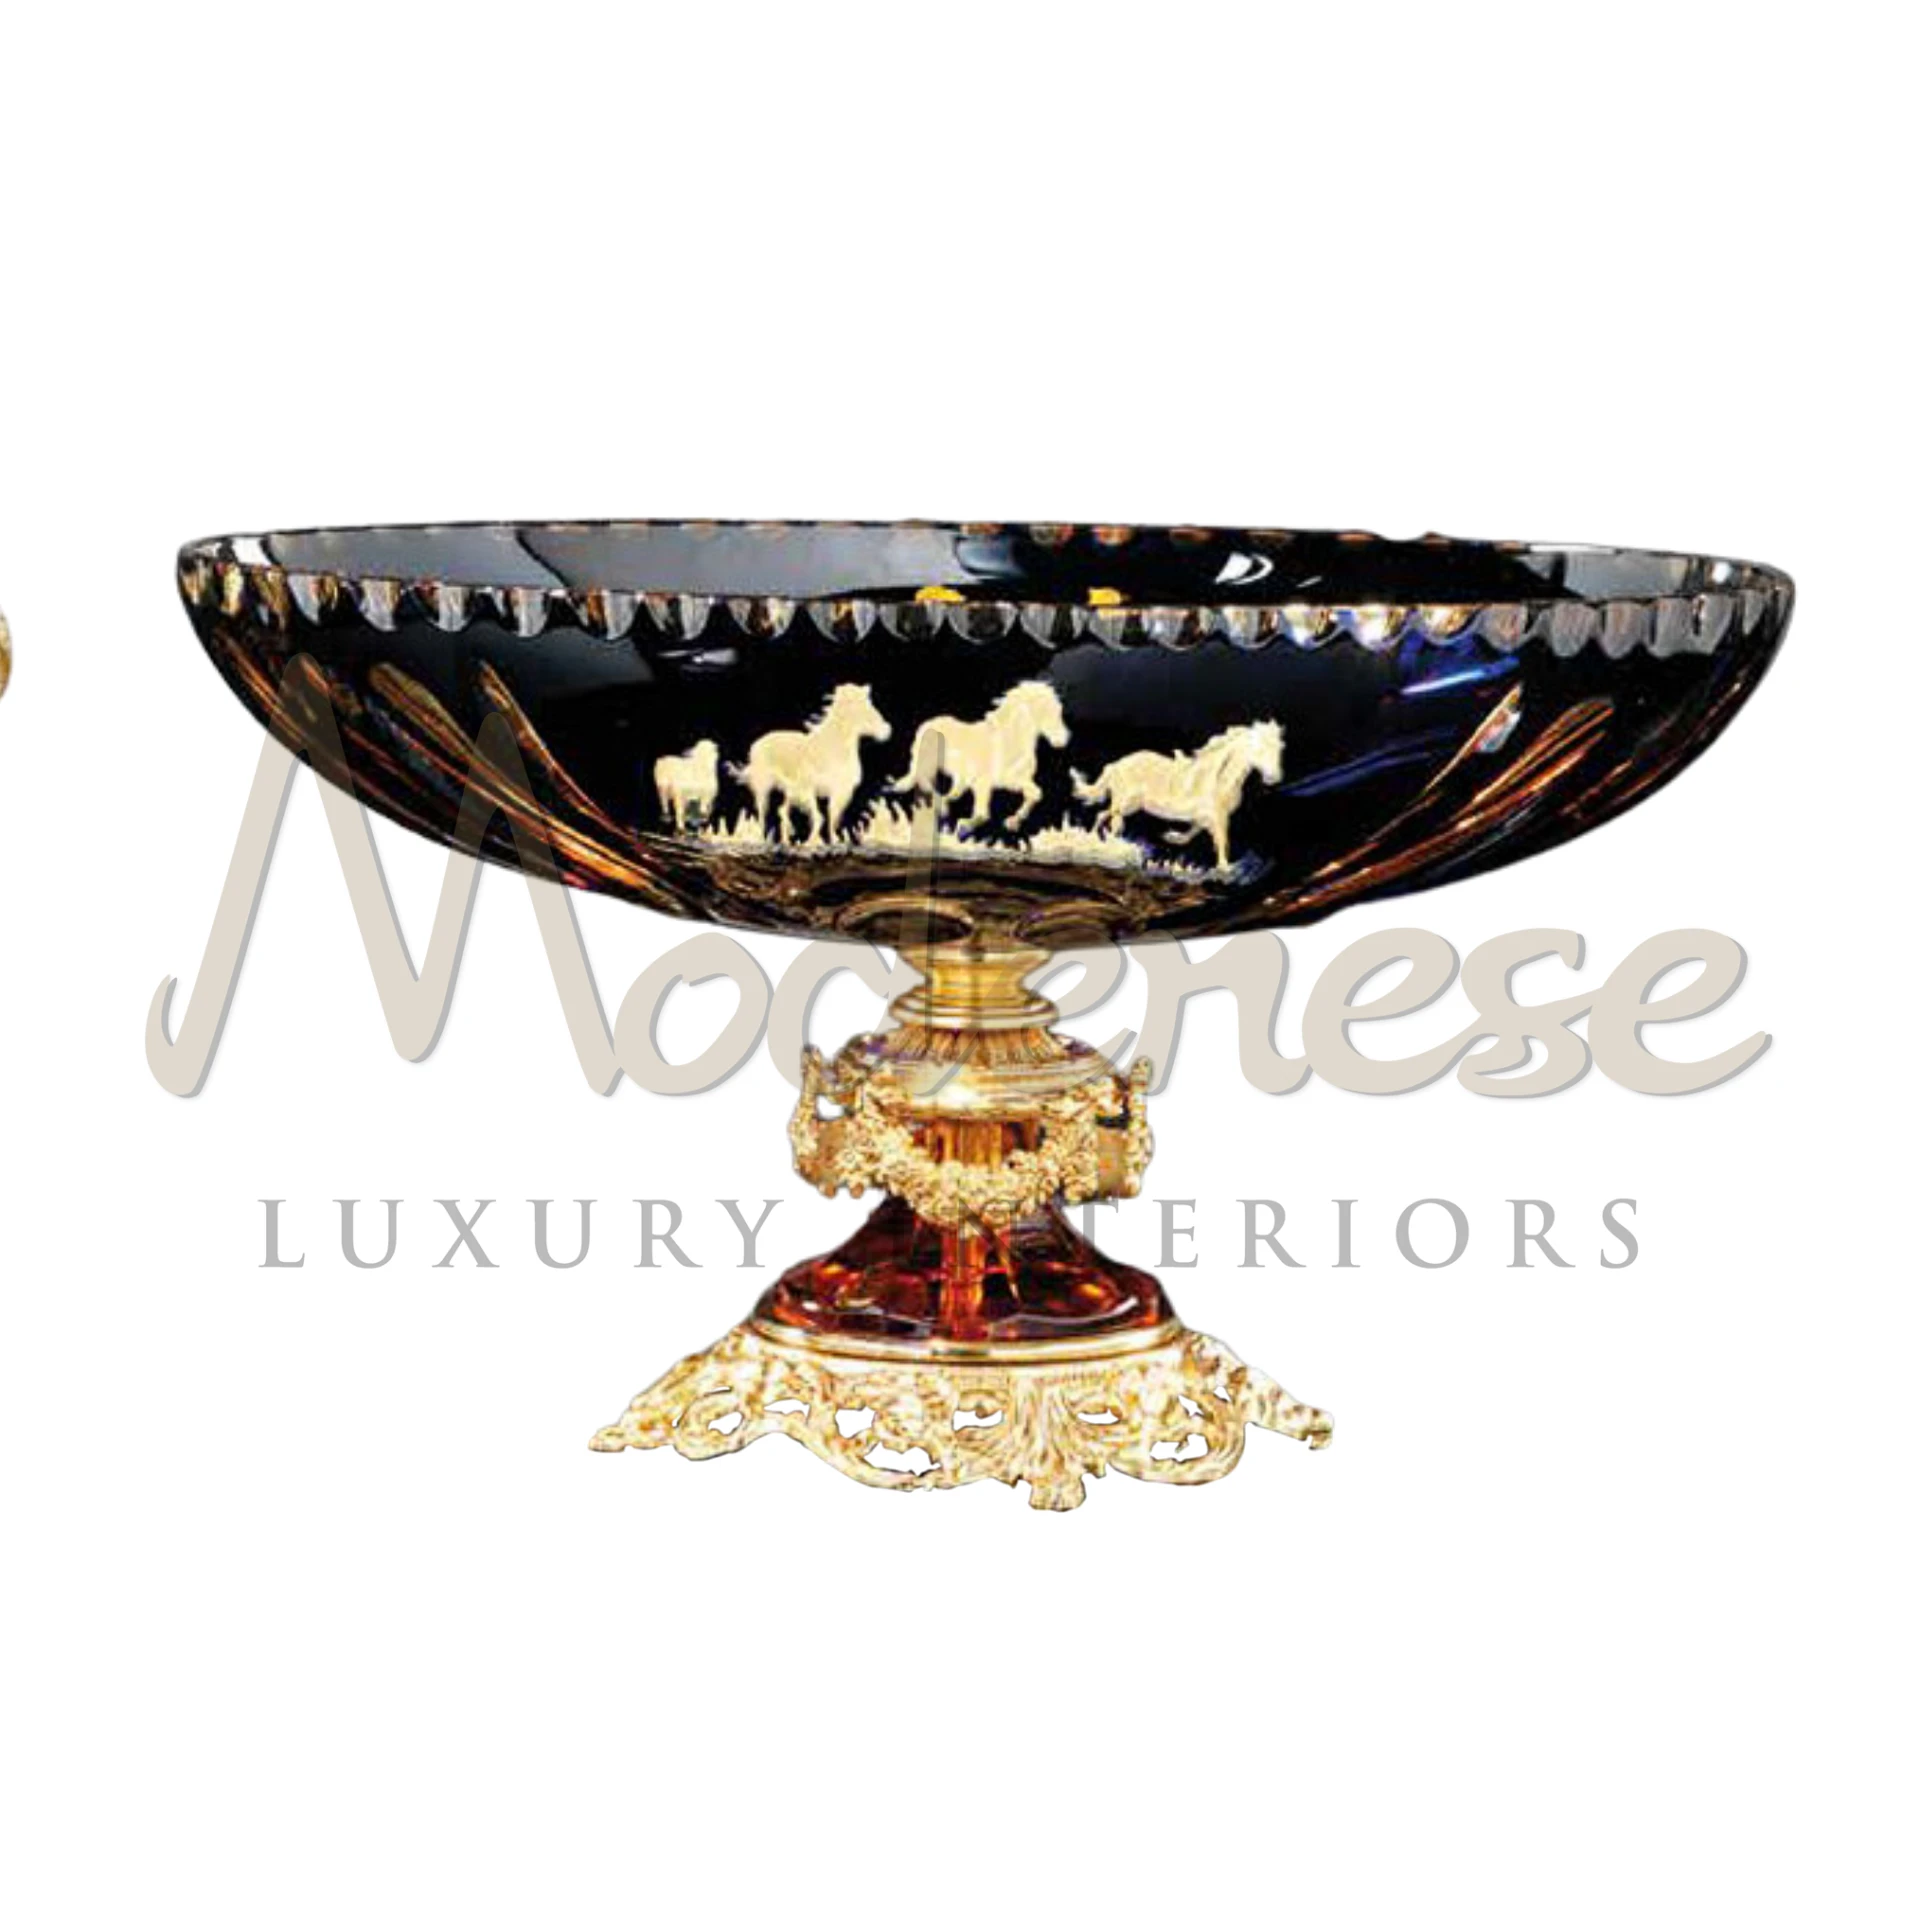 Traditional dark glass bowl in baroque style, adding elegance to luxury interiors.